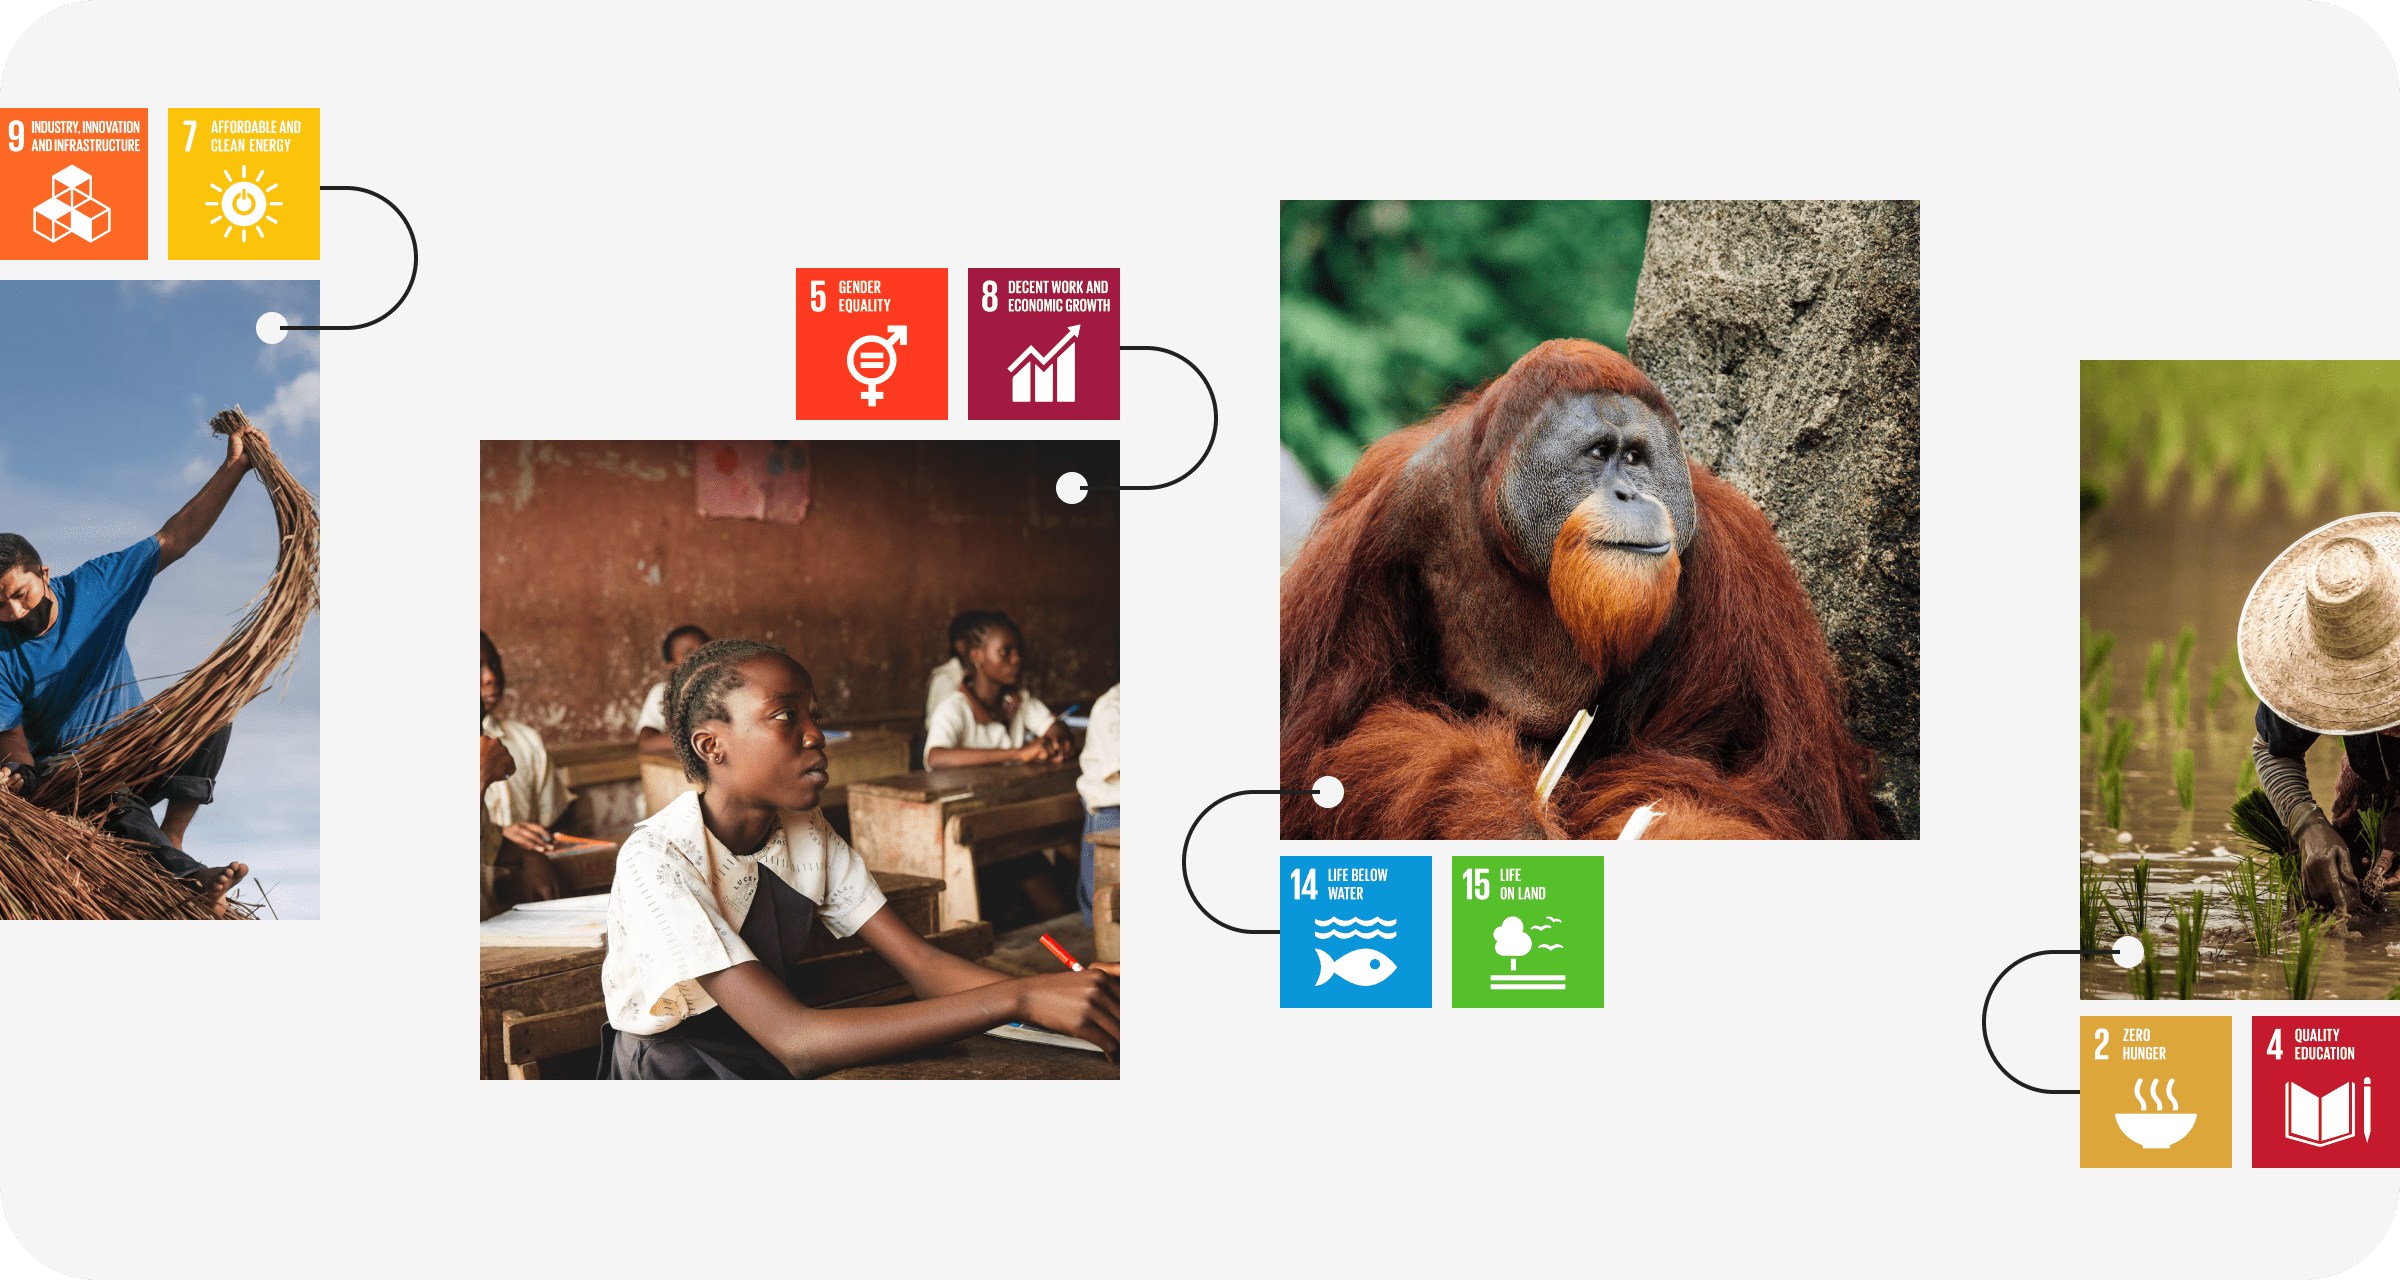 A photograph of African children in school and a photograph of a Bornean orangutan - showing different sustainable development goals